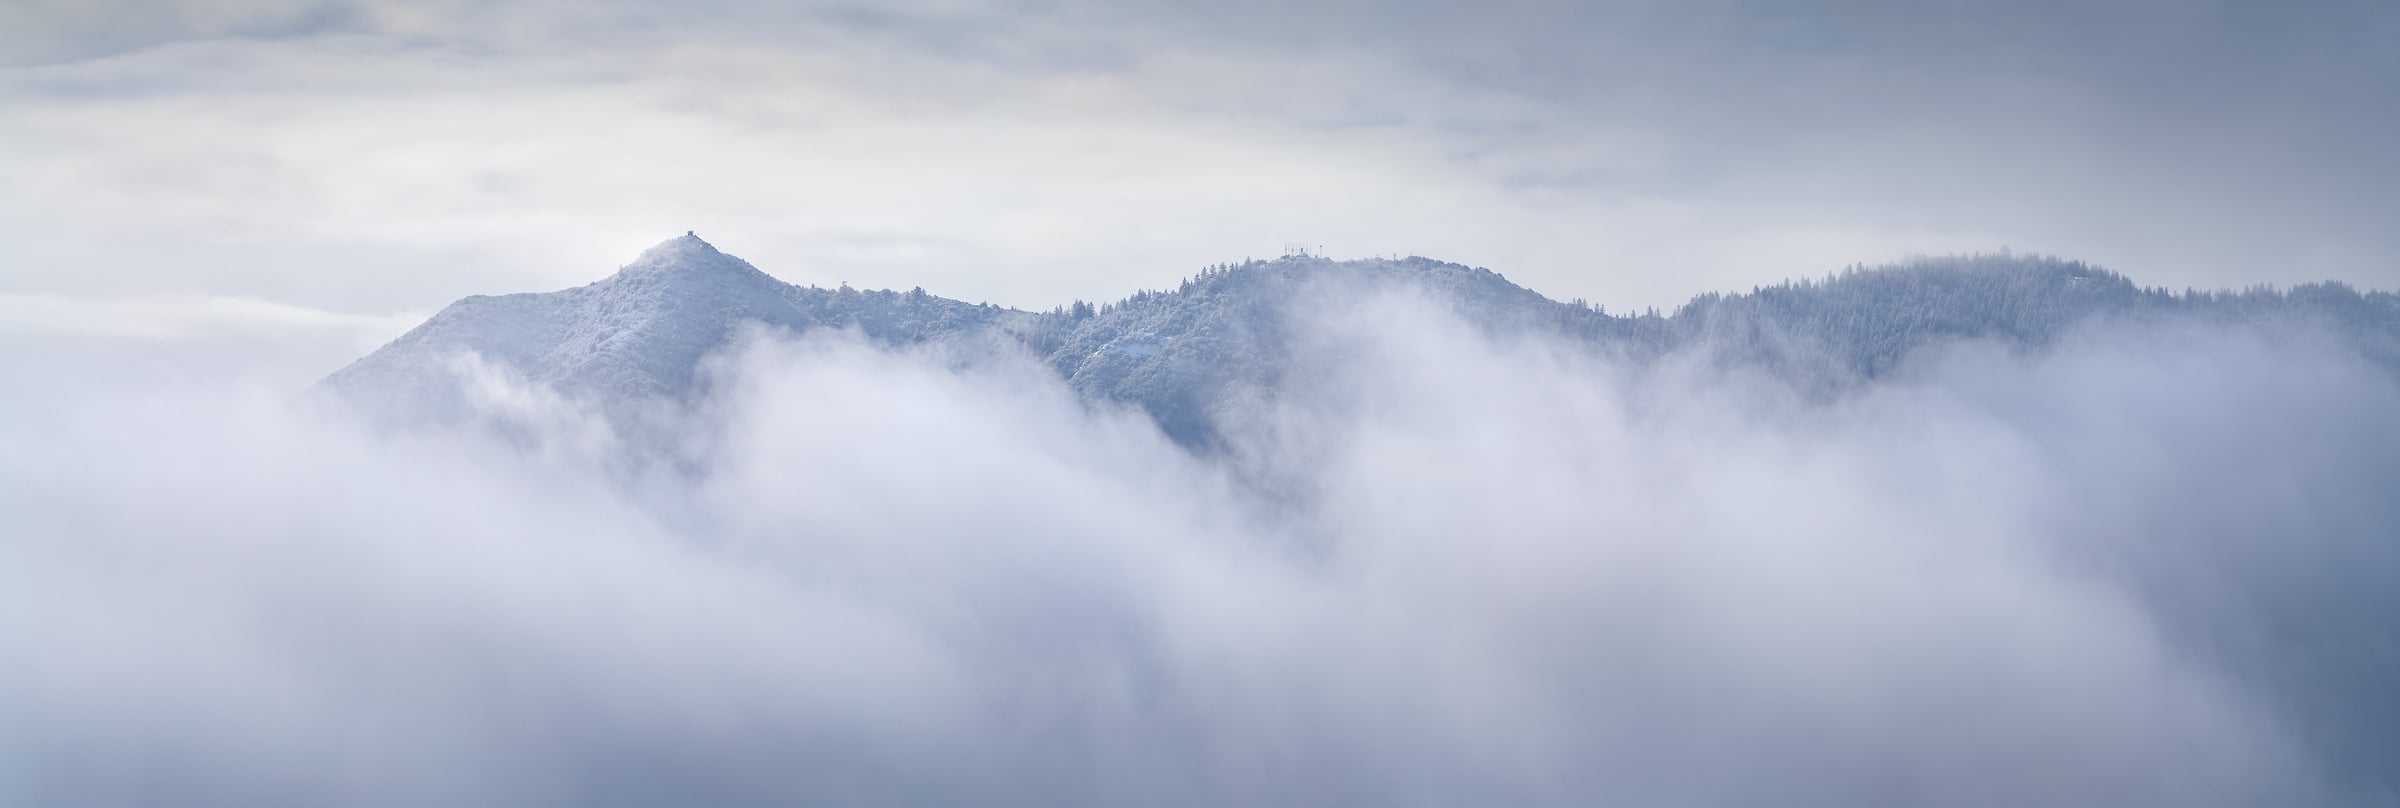 180 megapixels! A very high resolution, large-format VAST photo print of hills rising above clouds; landscape photograph created by Jeff Lewis in Marin County, California.